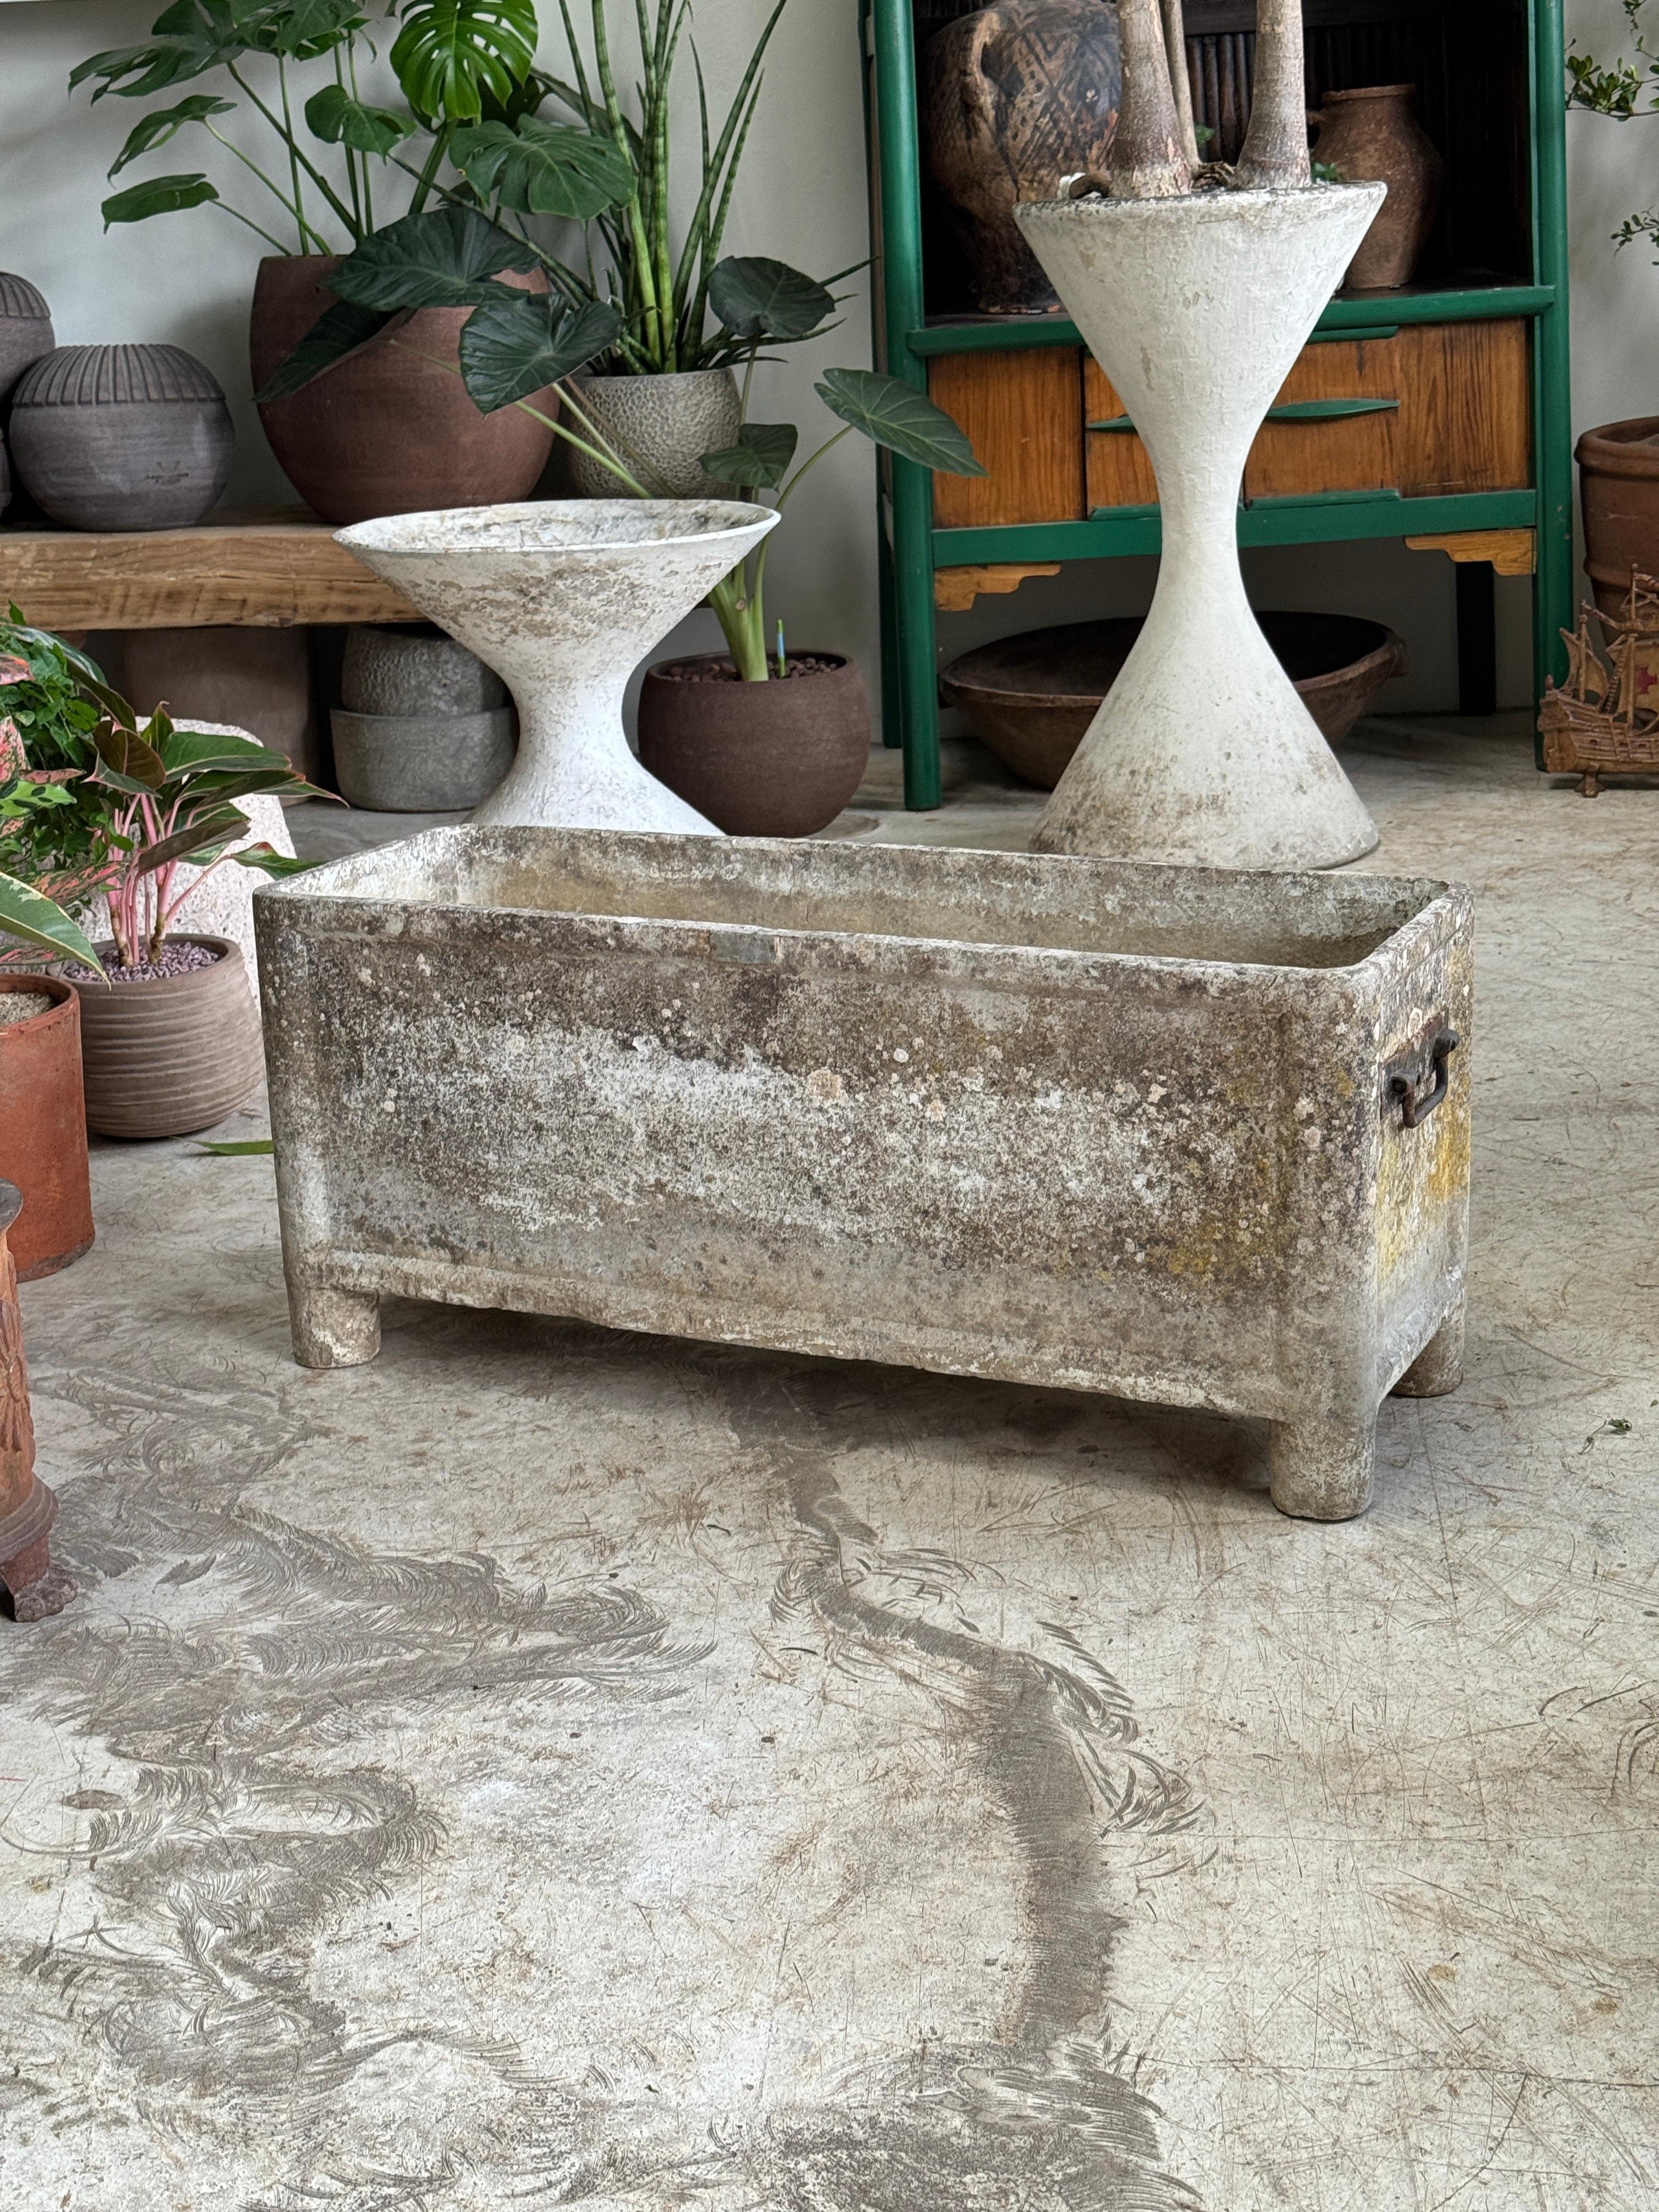 Crafted by Chanal Paris c. 1950, this rare and elegant French fibercement trough embodies a timeless minimalist aesthetic. Its design evokes the aesthetic of similar creations from the era, reminiscent of those by Willy Guhl. This trough has 2 metal